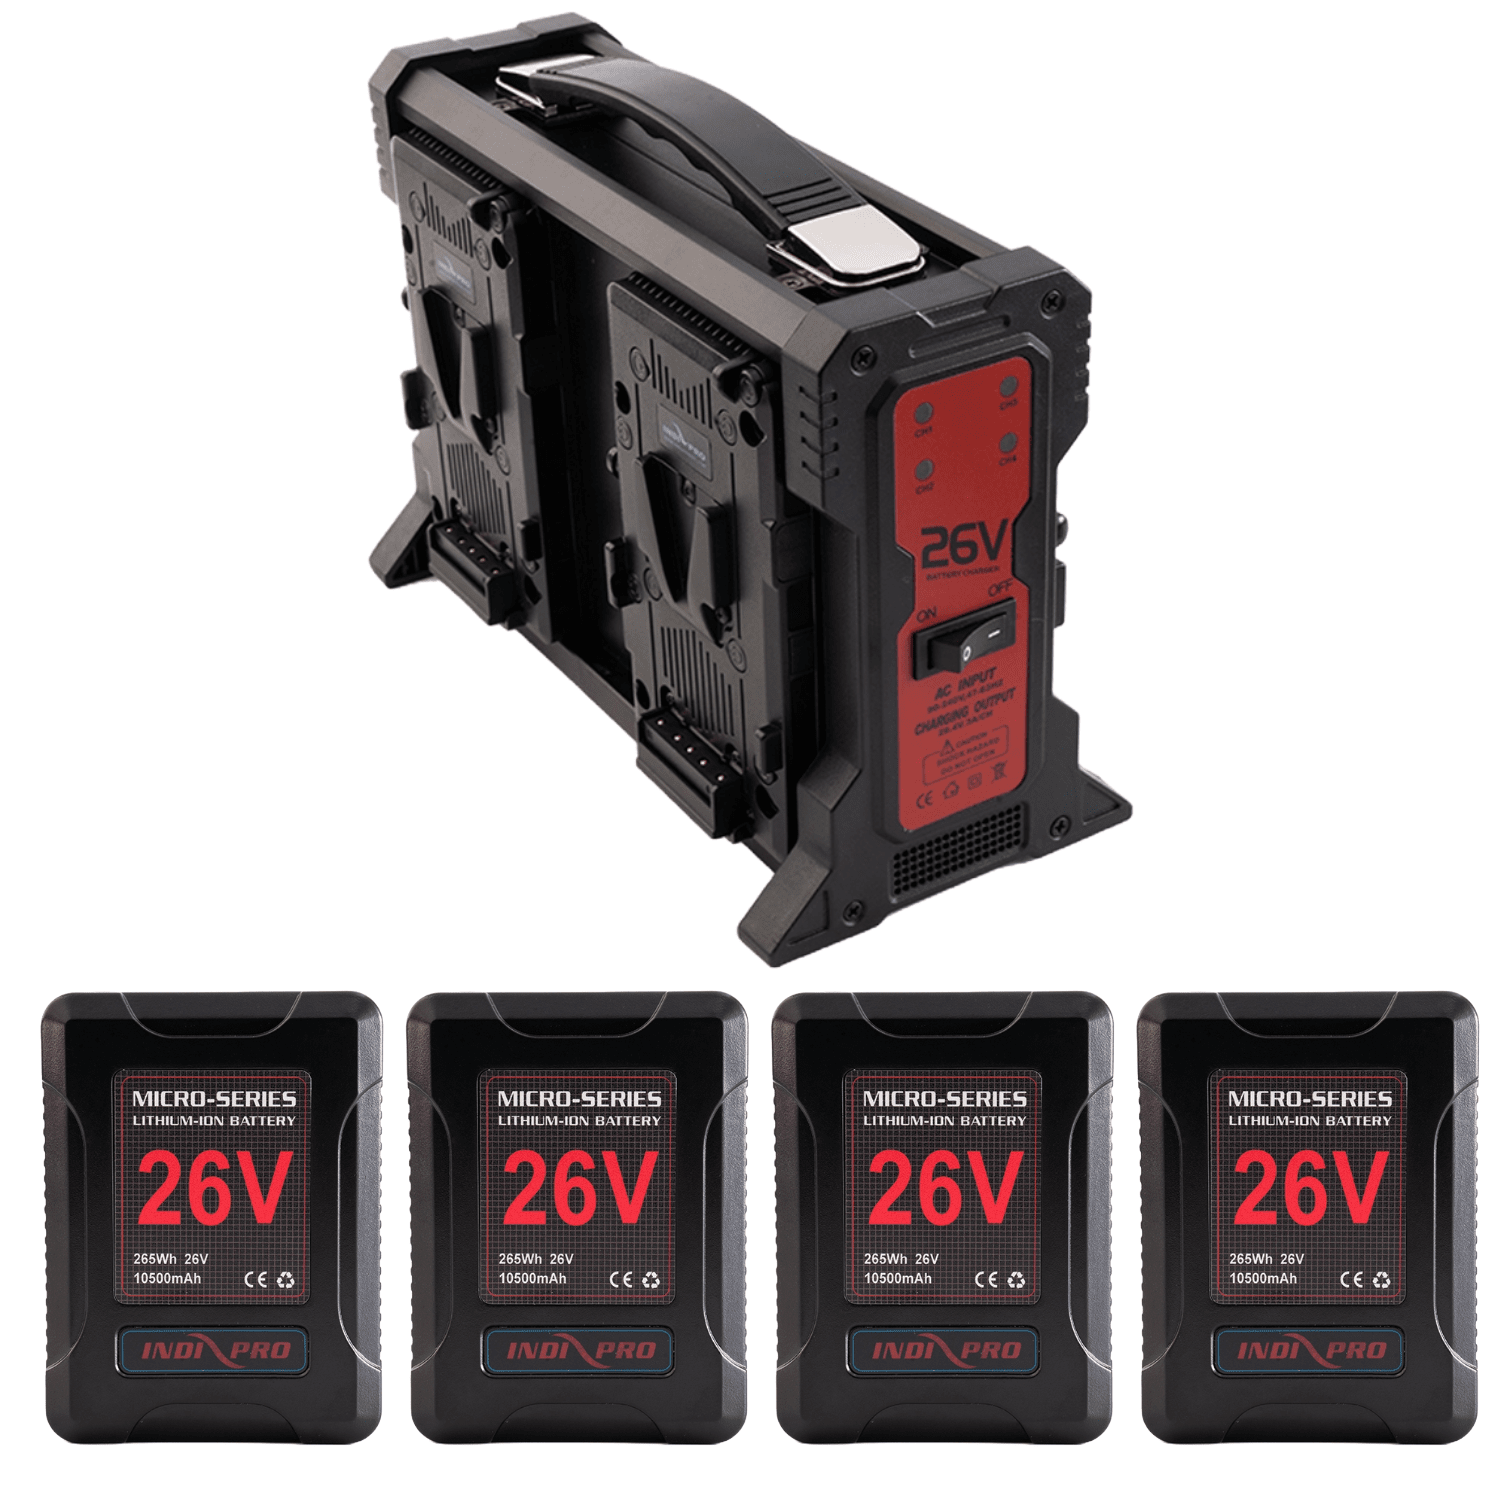 Micro-Series 26V 260Wh 4-Battery Kit with Quad Charger (V-Mount) Battery Kit Indipro 